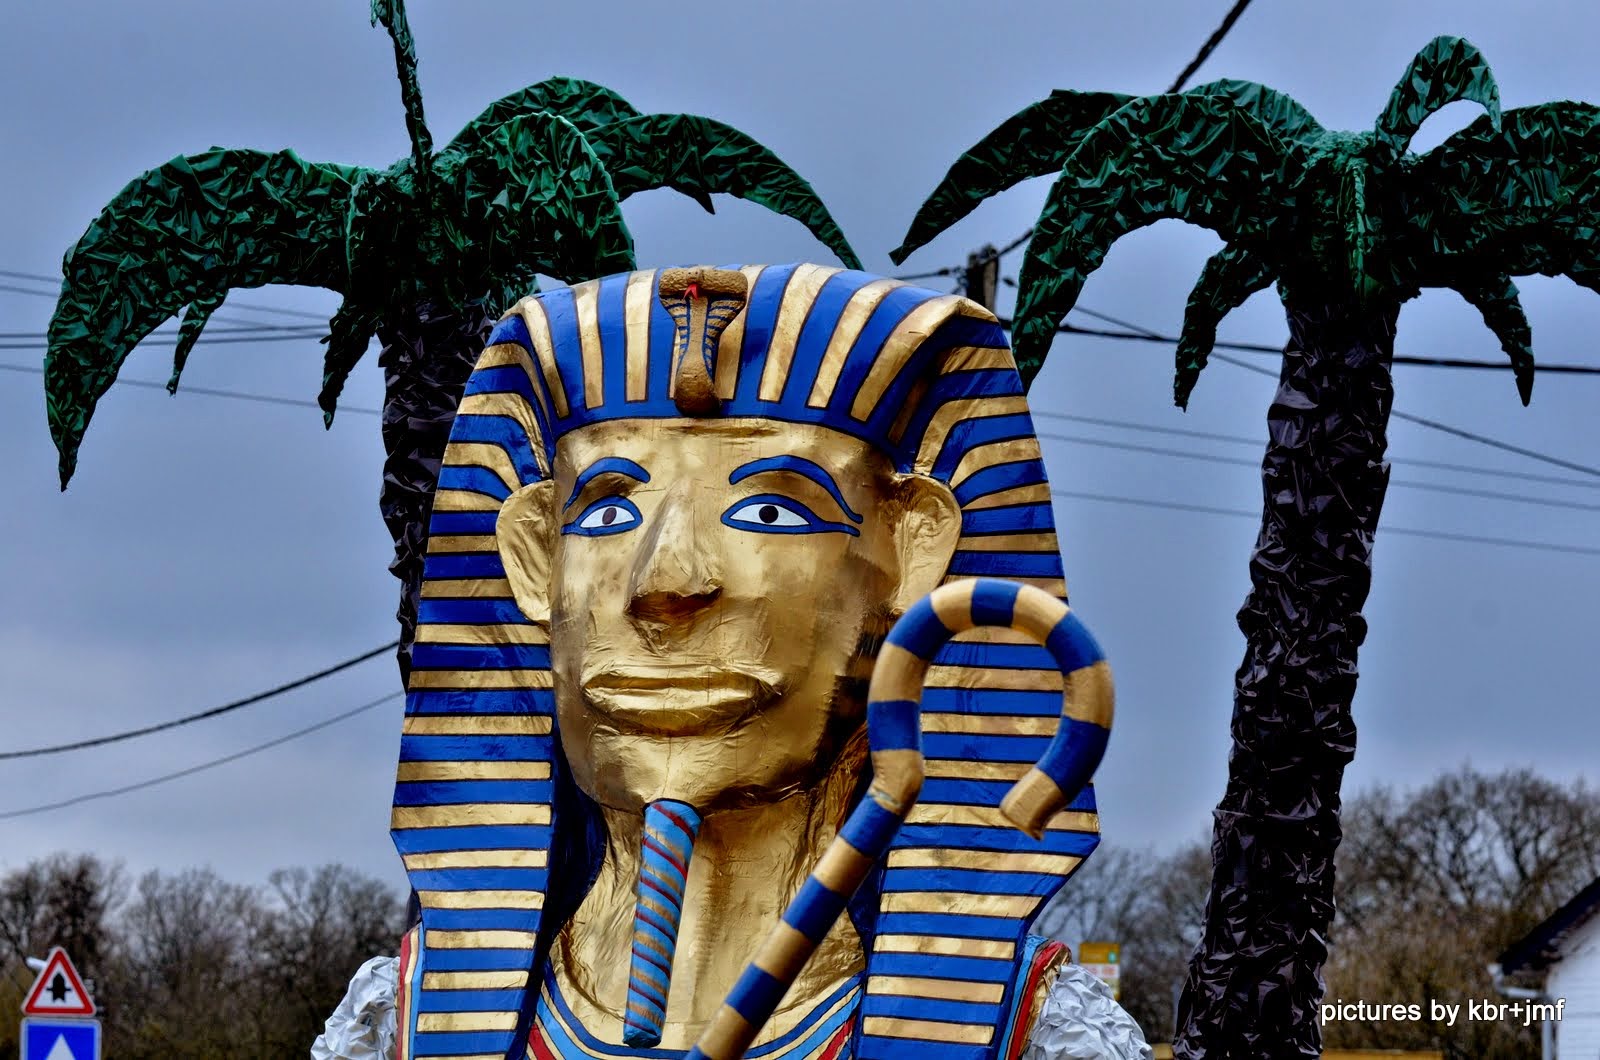 https://picasaweb.google.com/107376403462304408662/Egyptiens?authuser=0&authkey=Gv1sRgCLKB2JXUvIL4kQE&feat=directlink